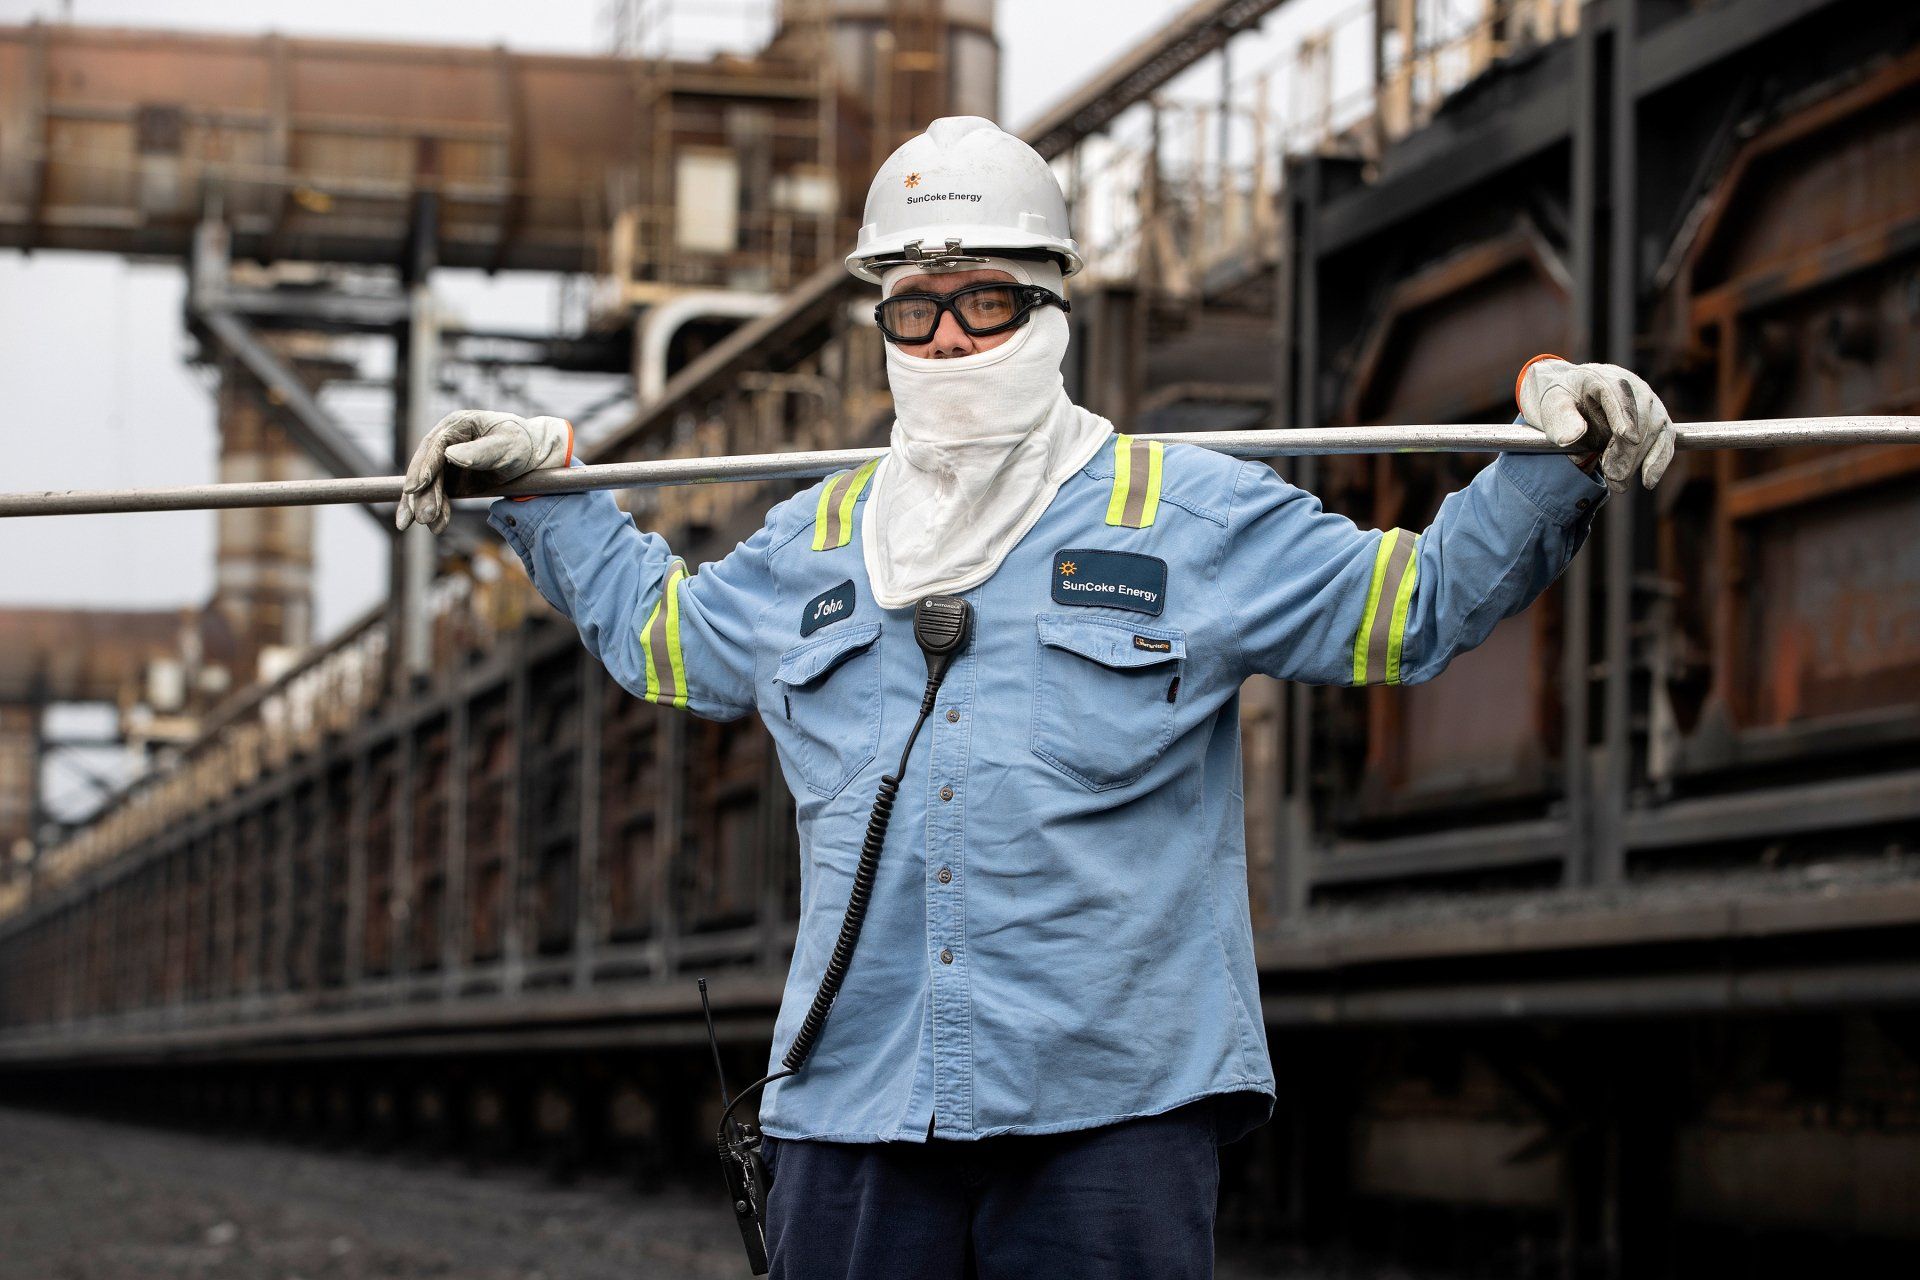 A worker at an energy company pauses to have his photo taken.